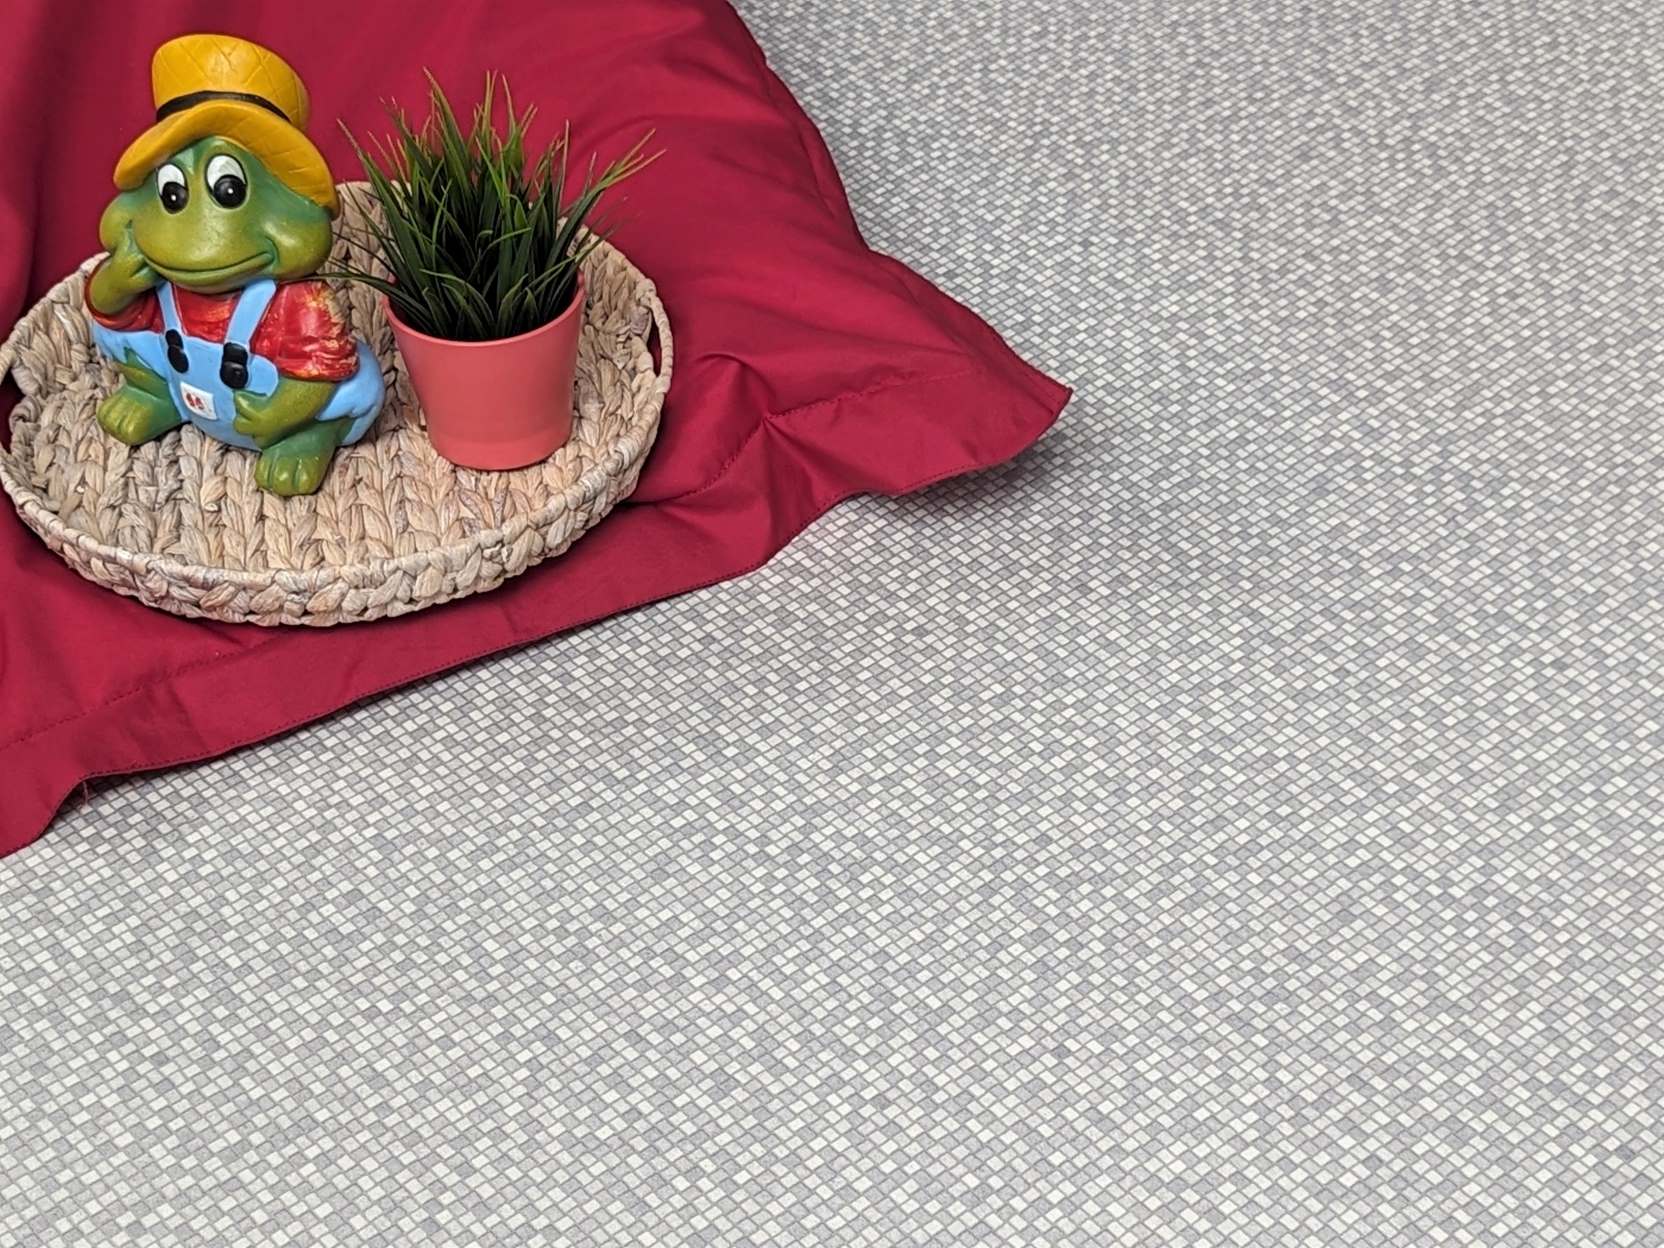 PVC flooring in silver gray boxes